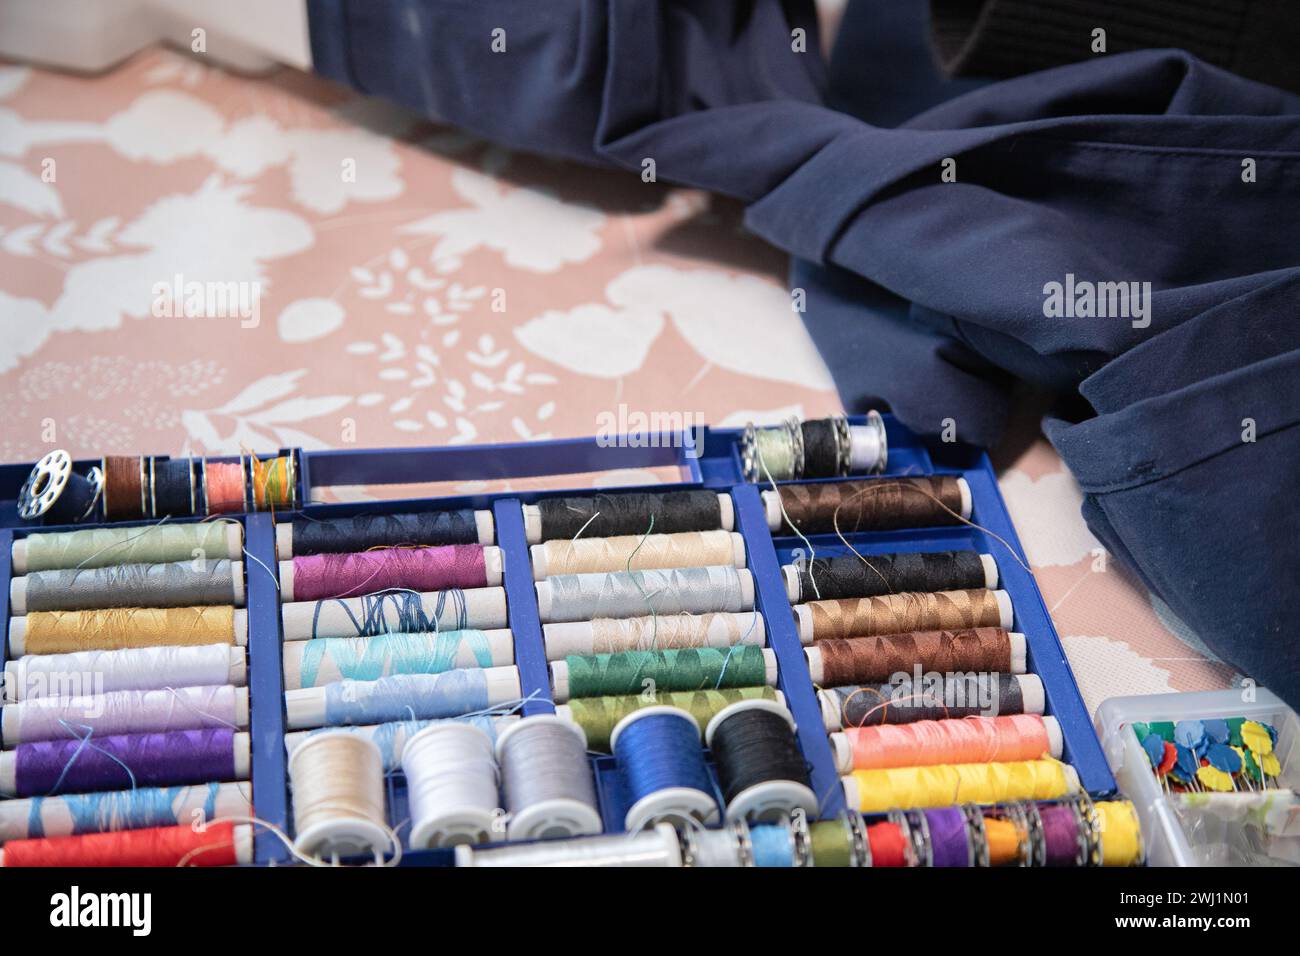 Rolls of thread, spools of thread in different colors for sewing work. Work table with different sewing utensils. Stock Photo